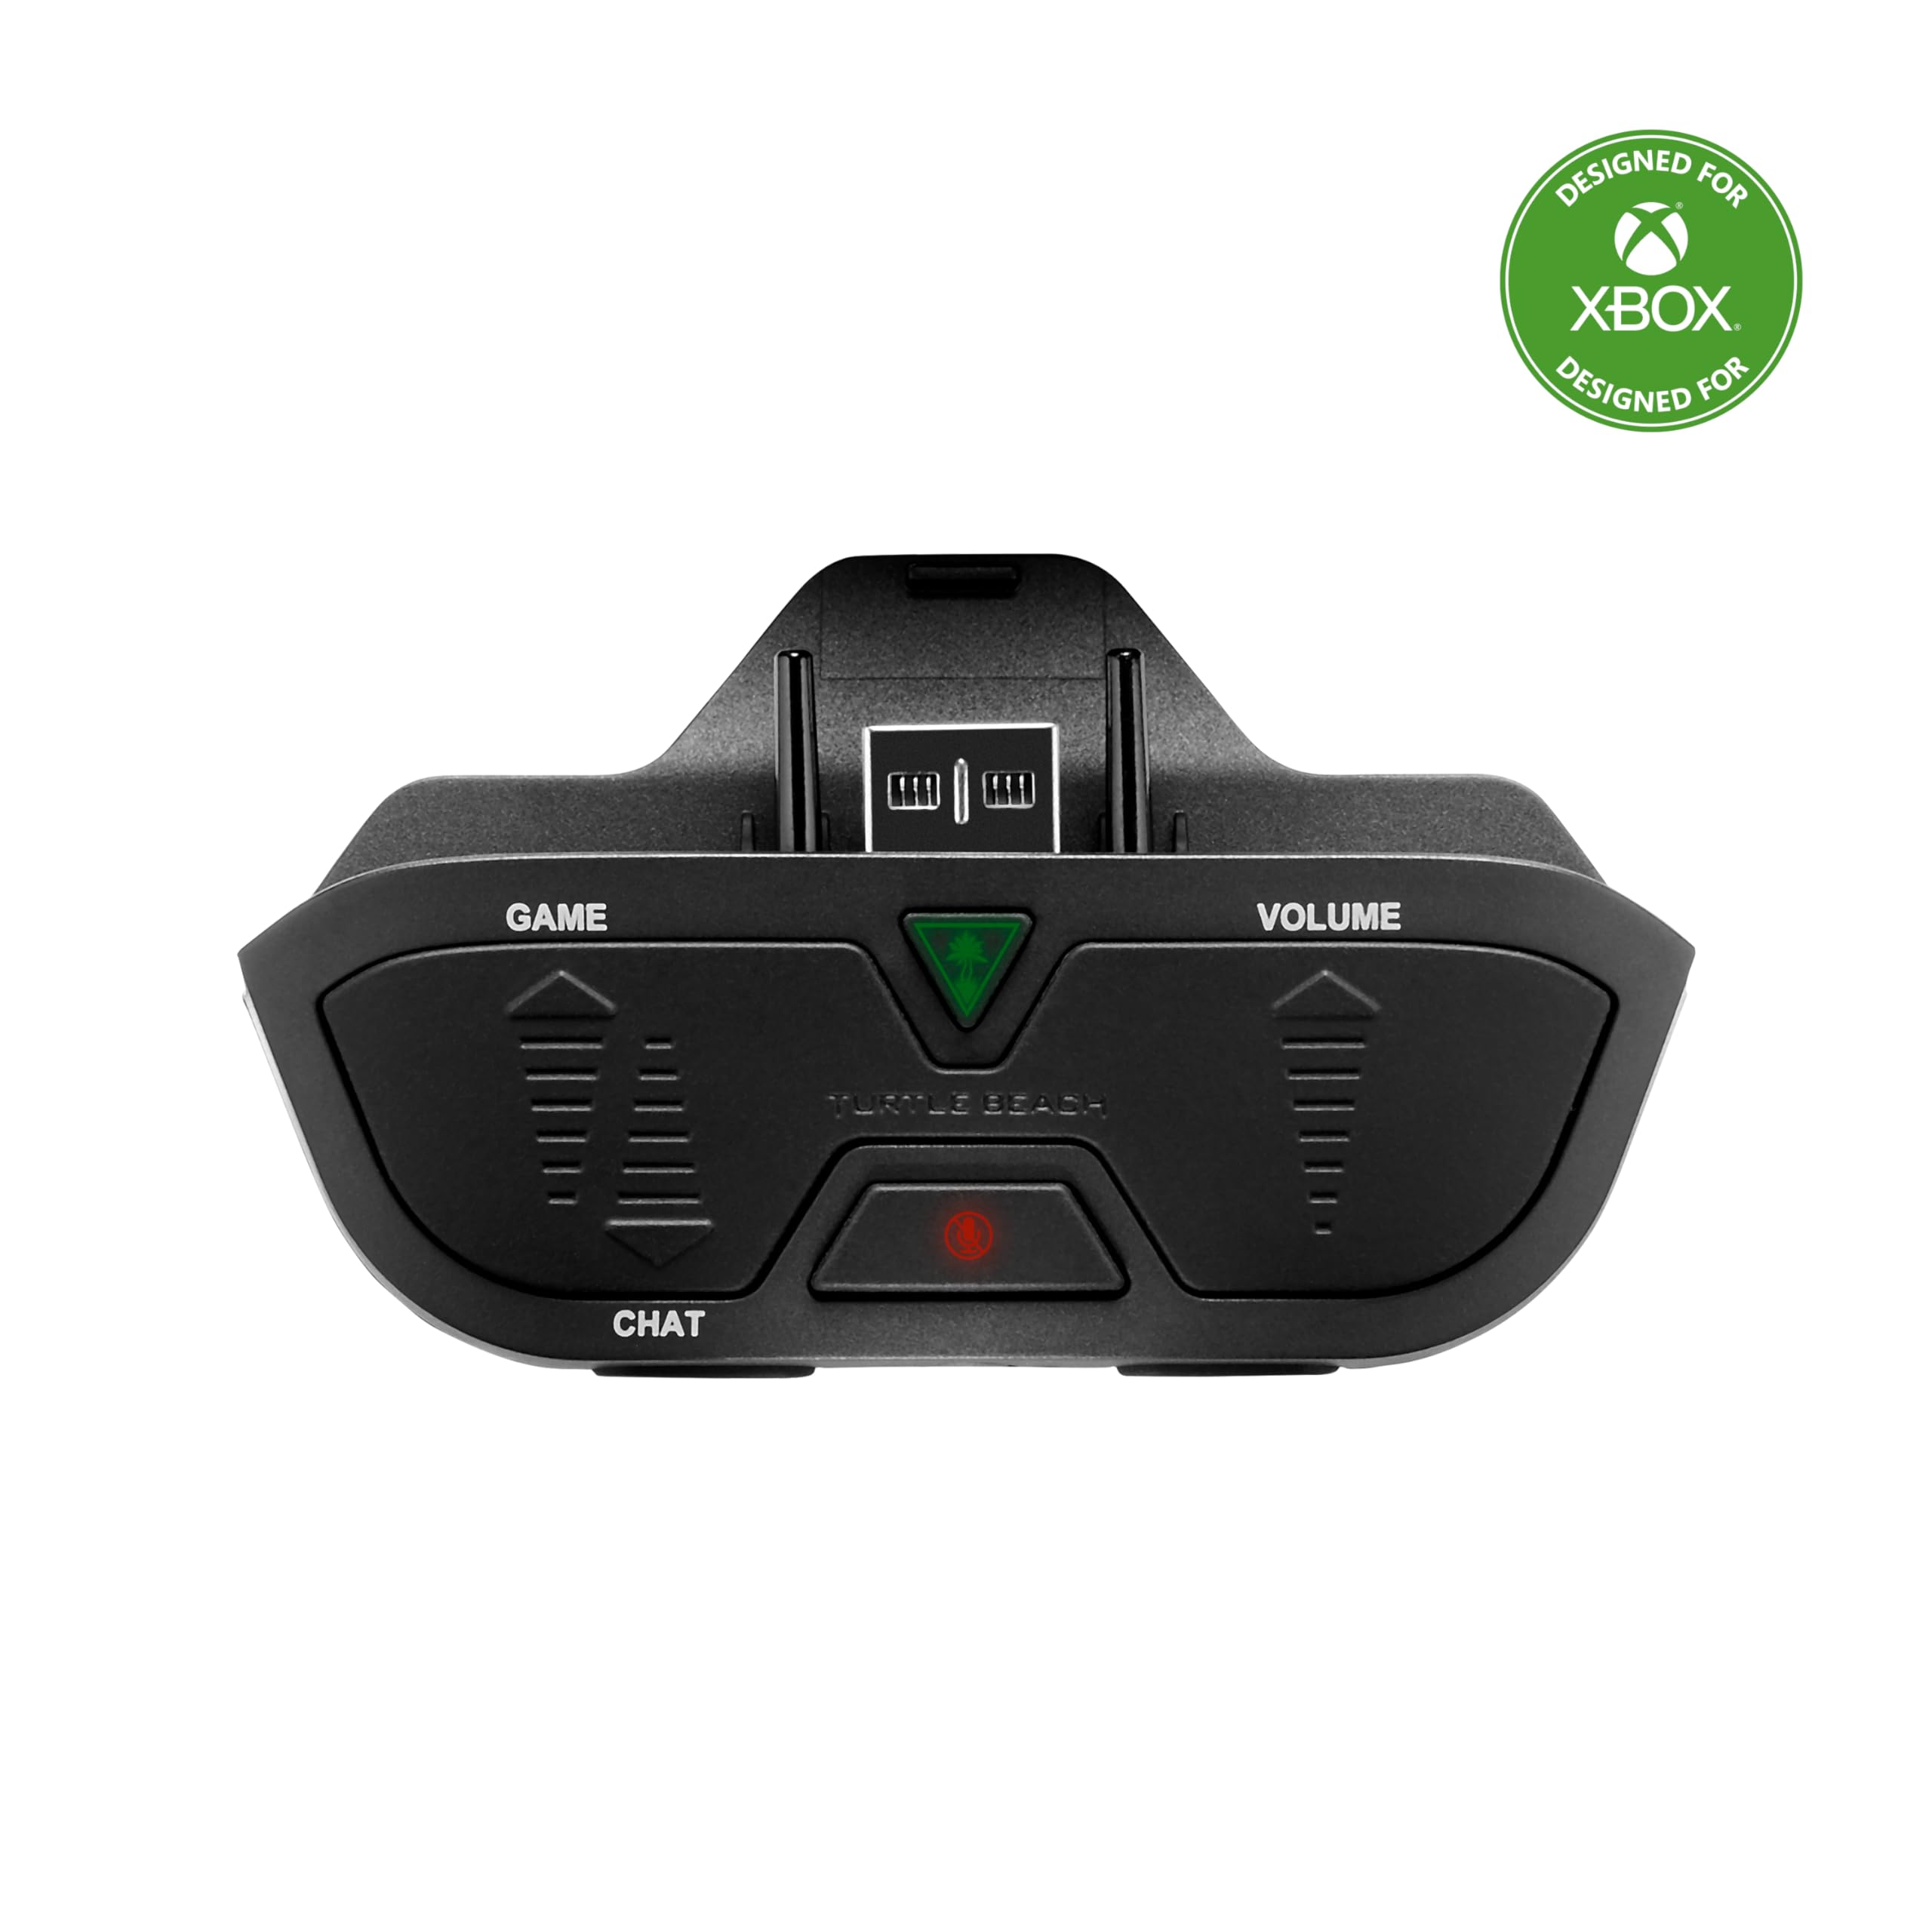 Make sure the headset is properly connected to the controller.
Try using a different headset or controller to see if the issue is with the headset or the controller.